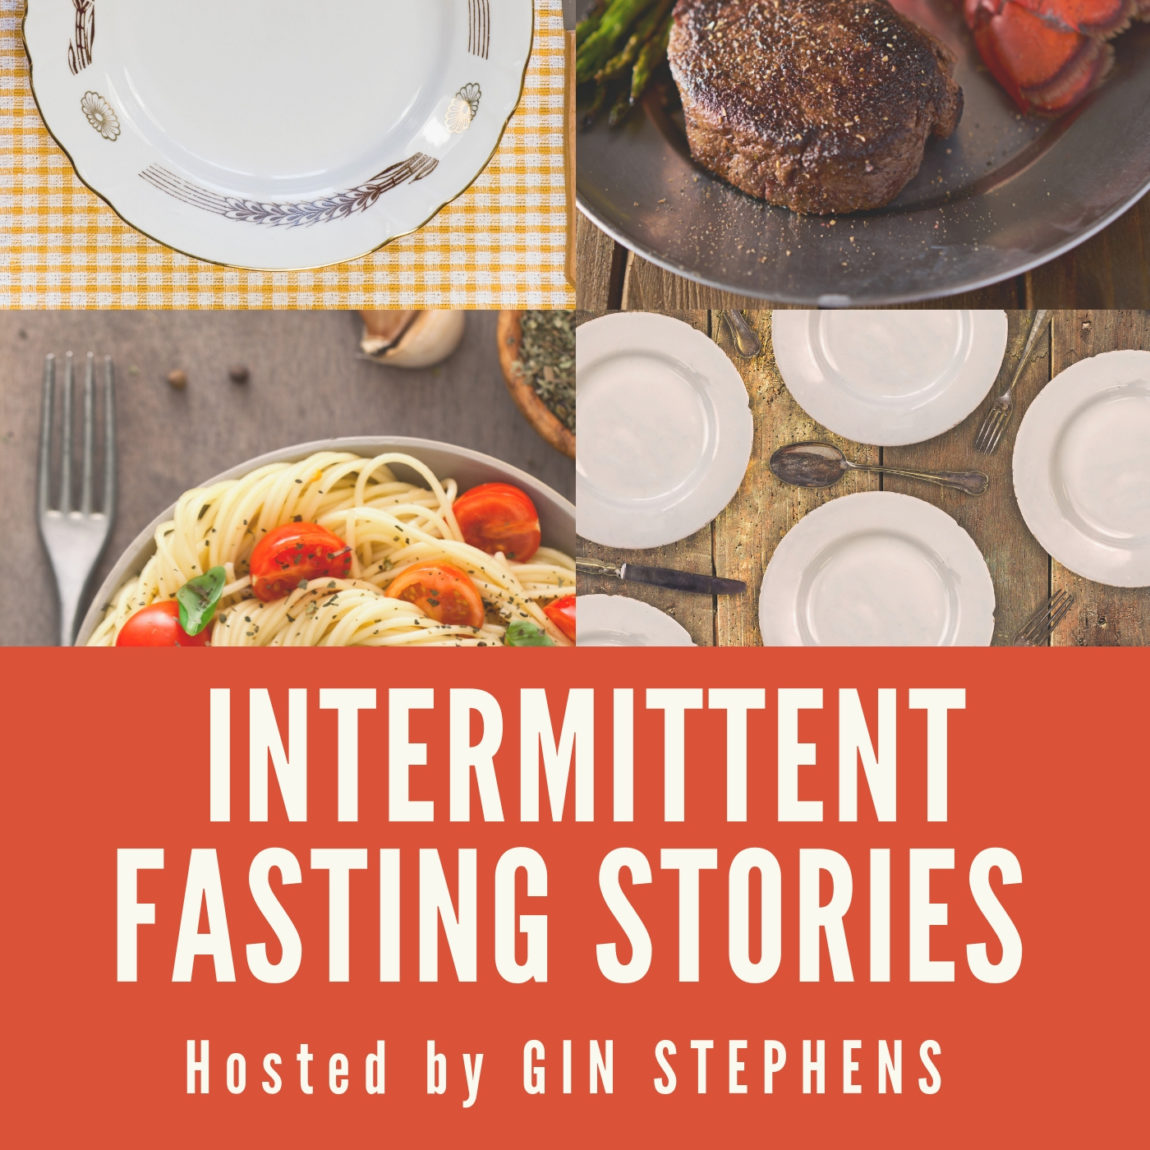 Intermittent Fasting Stories Podcast, hosted by Gin Stephens